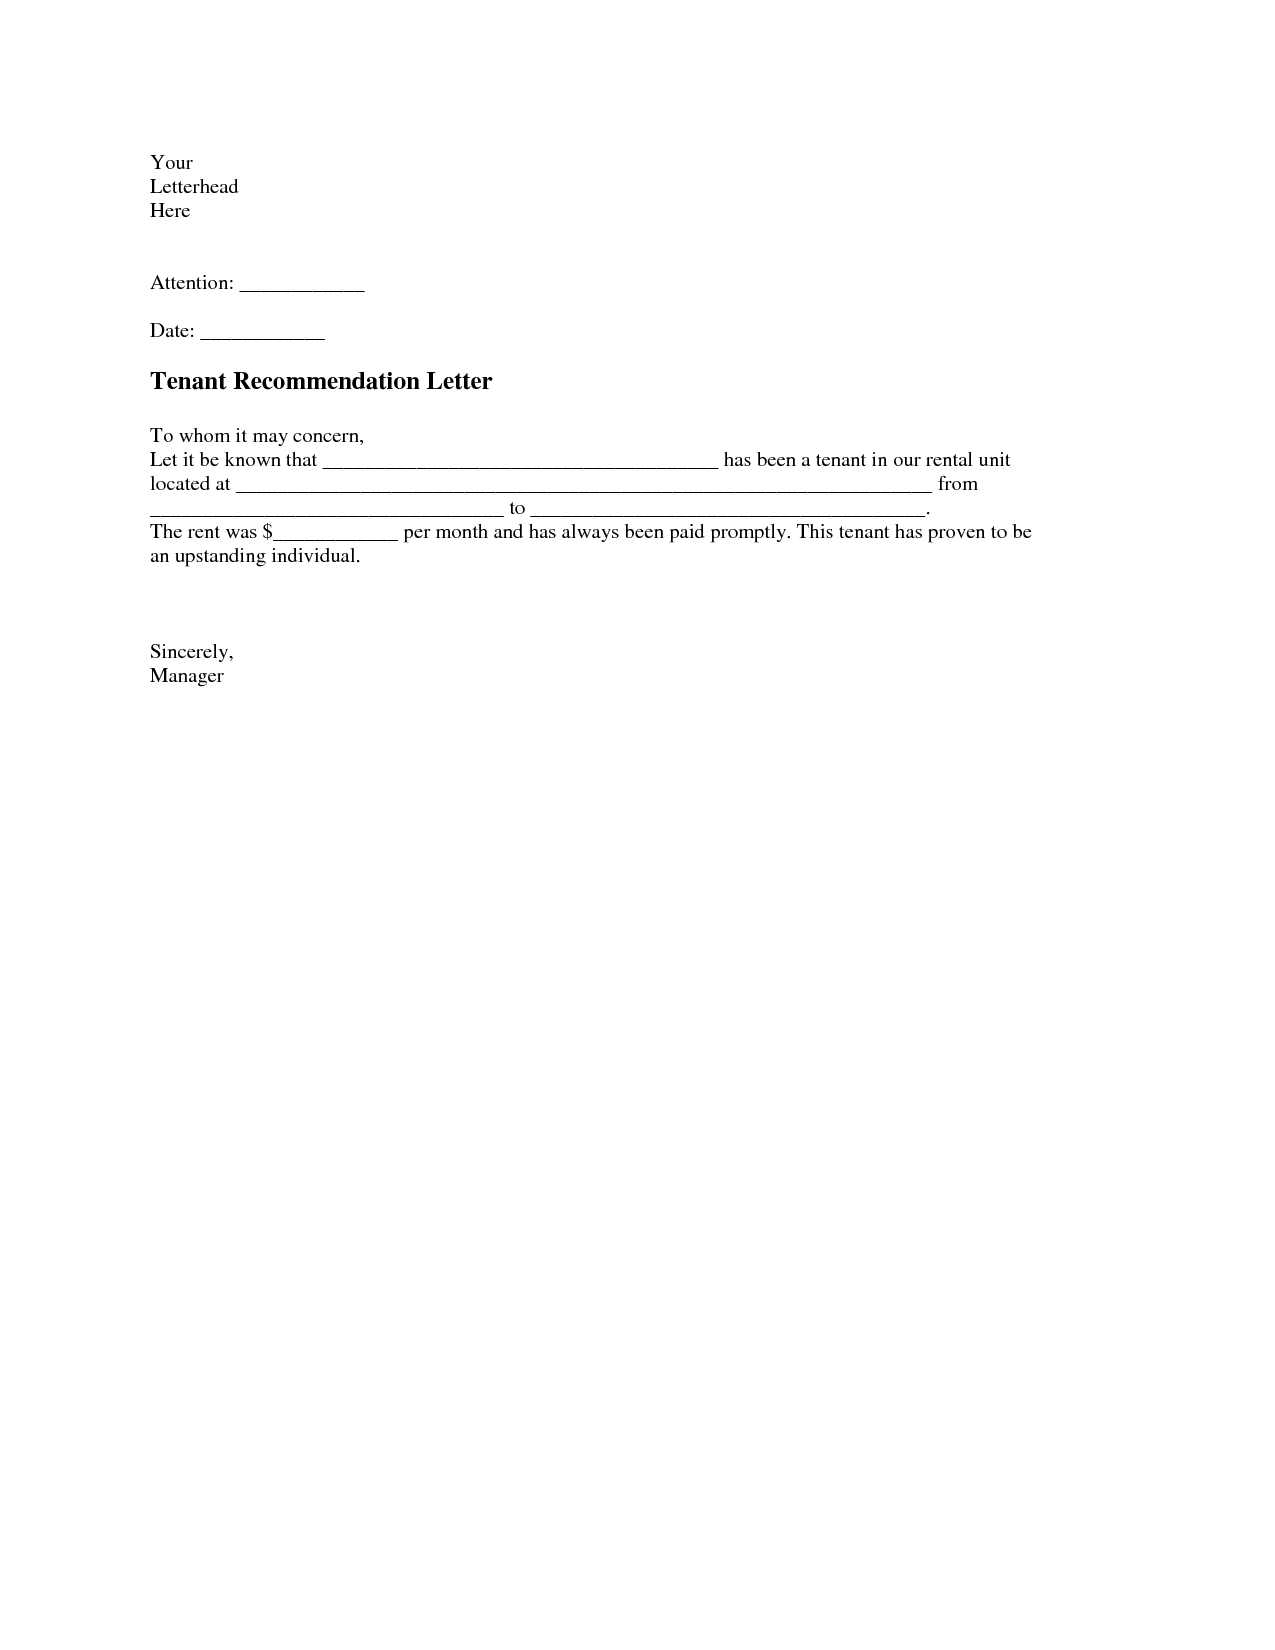 Landlord Eviction Letter Template - Tenant Re Mendation Letter A Tenant Re Mendation Letter is